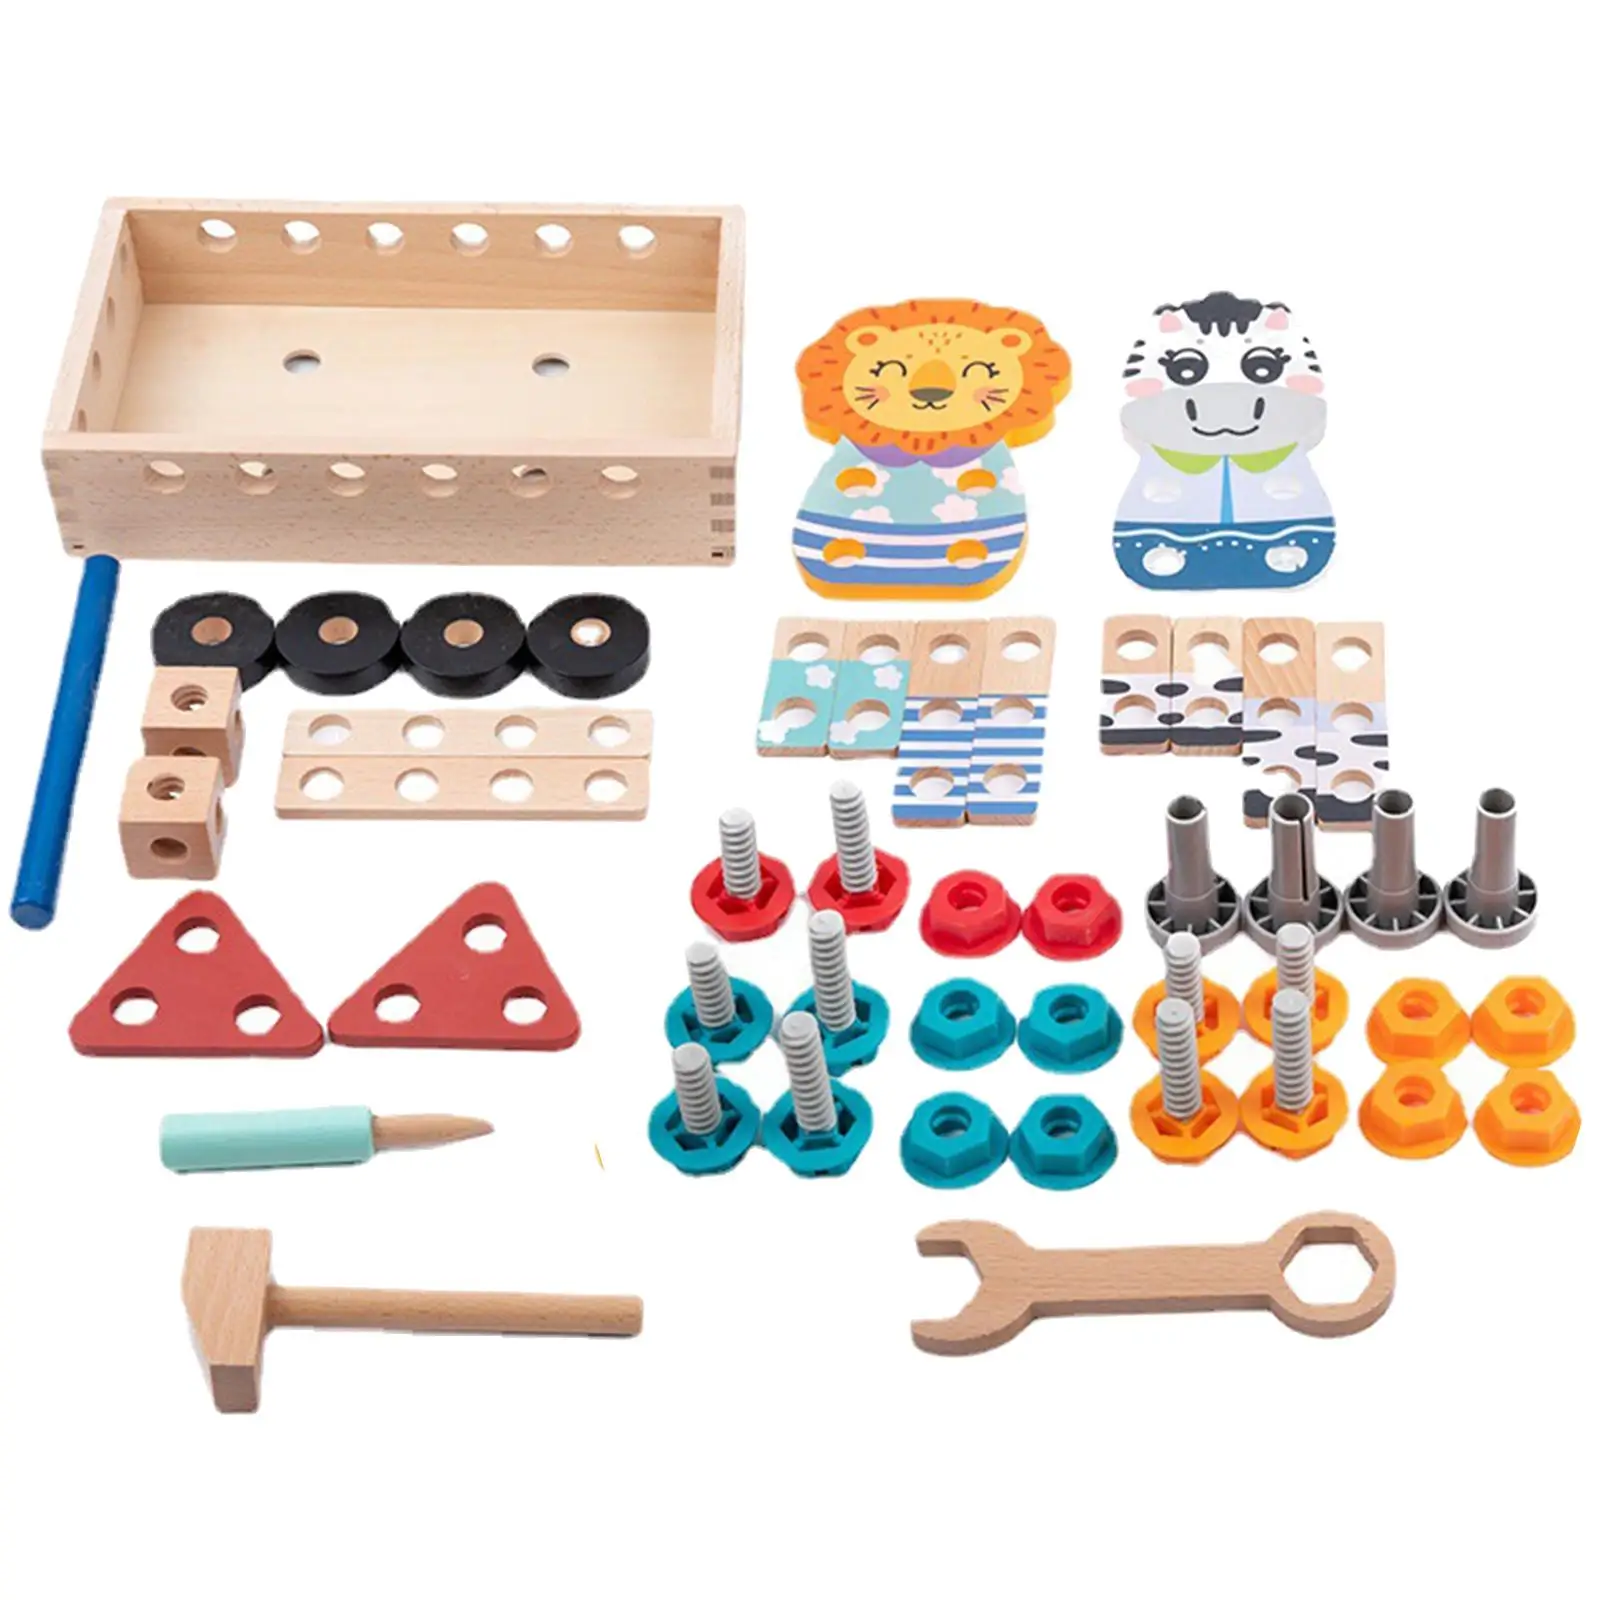 Kids Construction Toy Set Creative Portable Cognitive montessori Toolbox Set for Activities Role Play Preschool Education